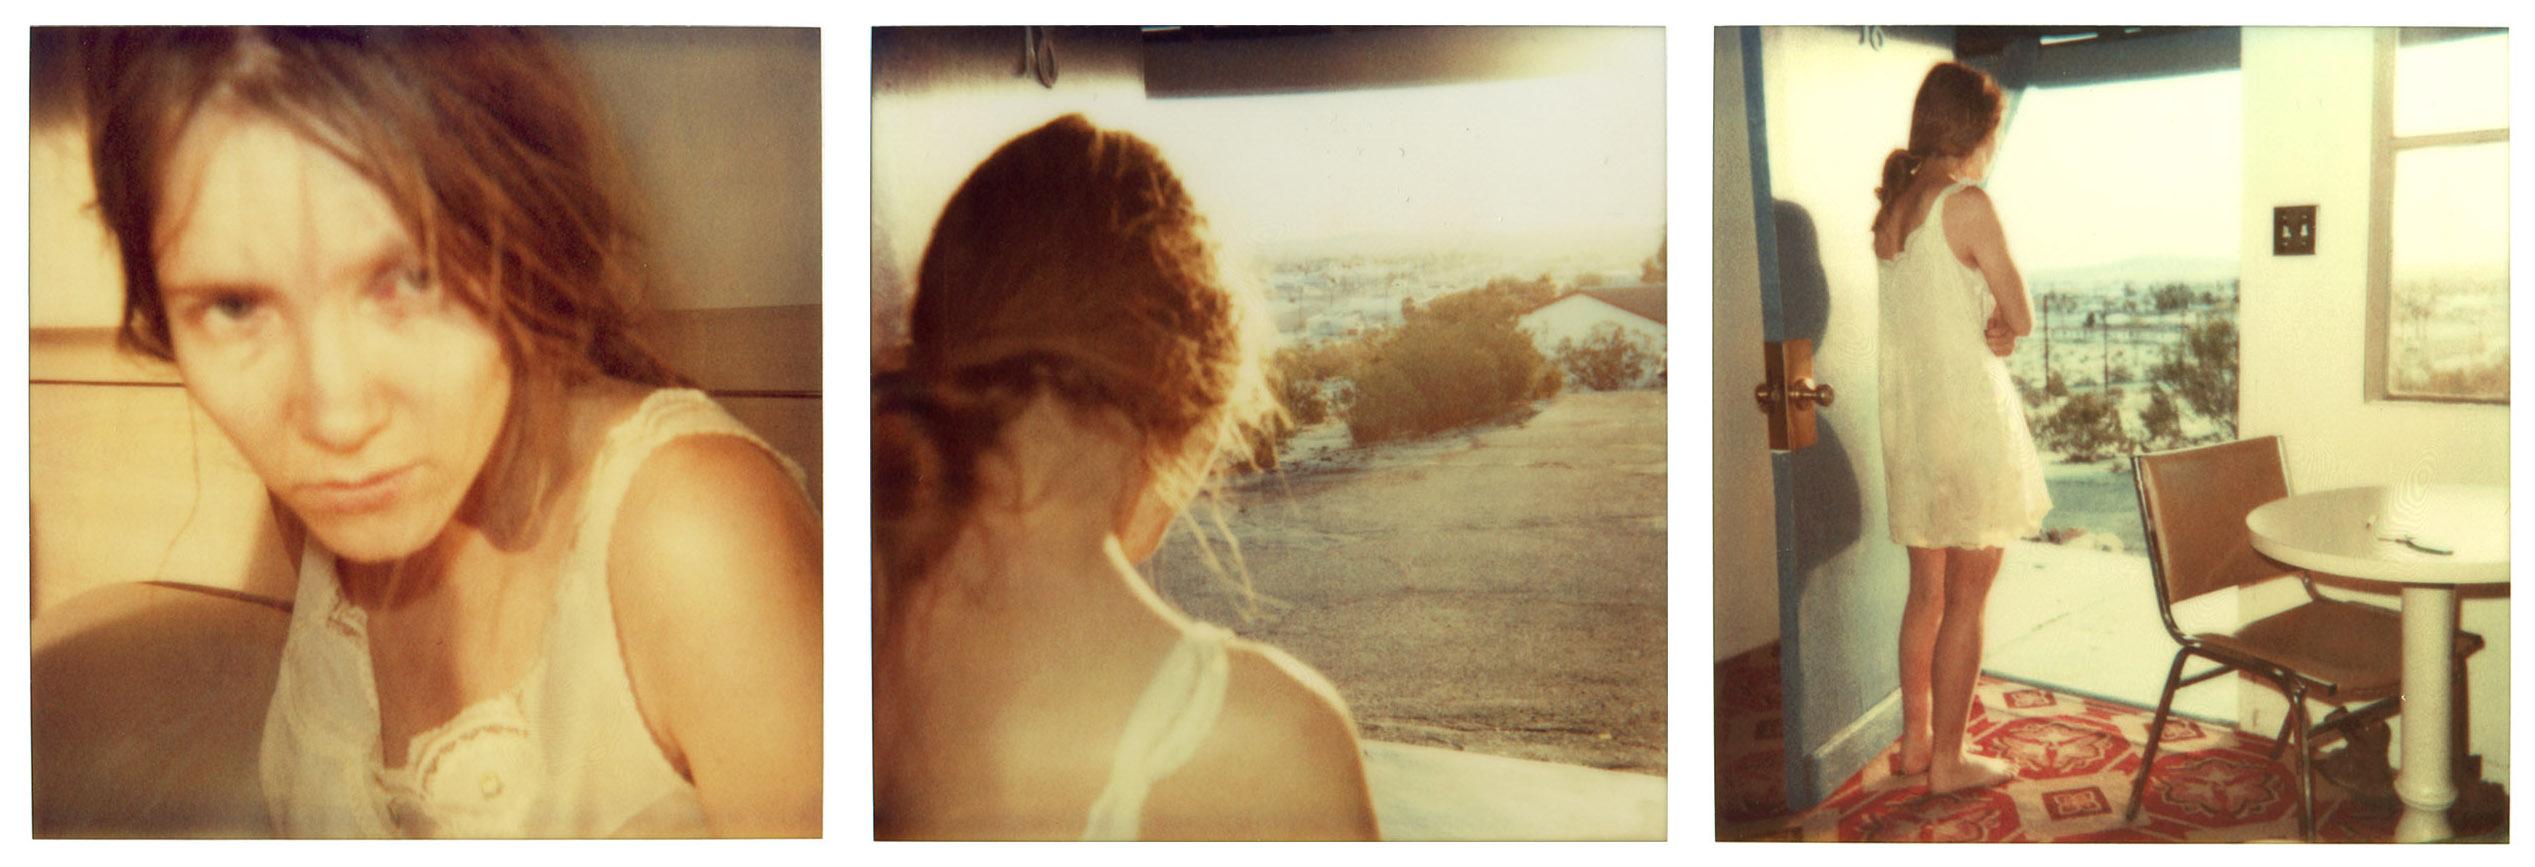 Stefanie Schneider Color Photograph - Hillview Motel (Last Picture Show) - analog, mounted, based on 3 Polaroids